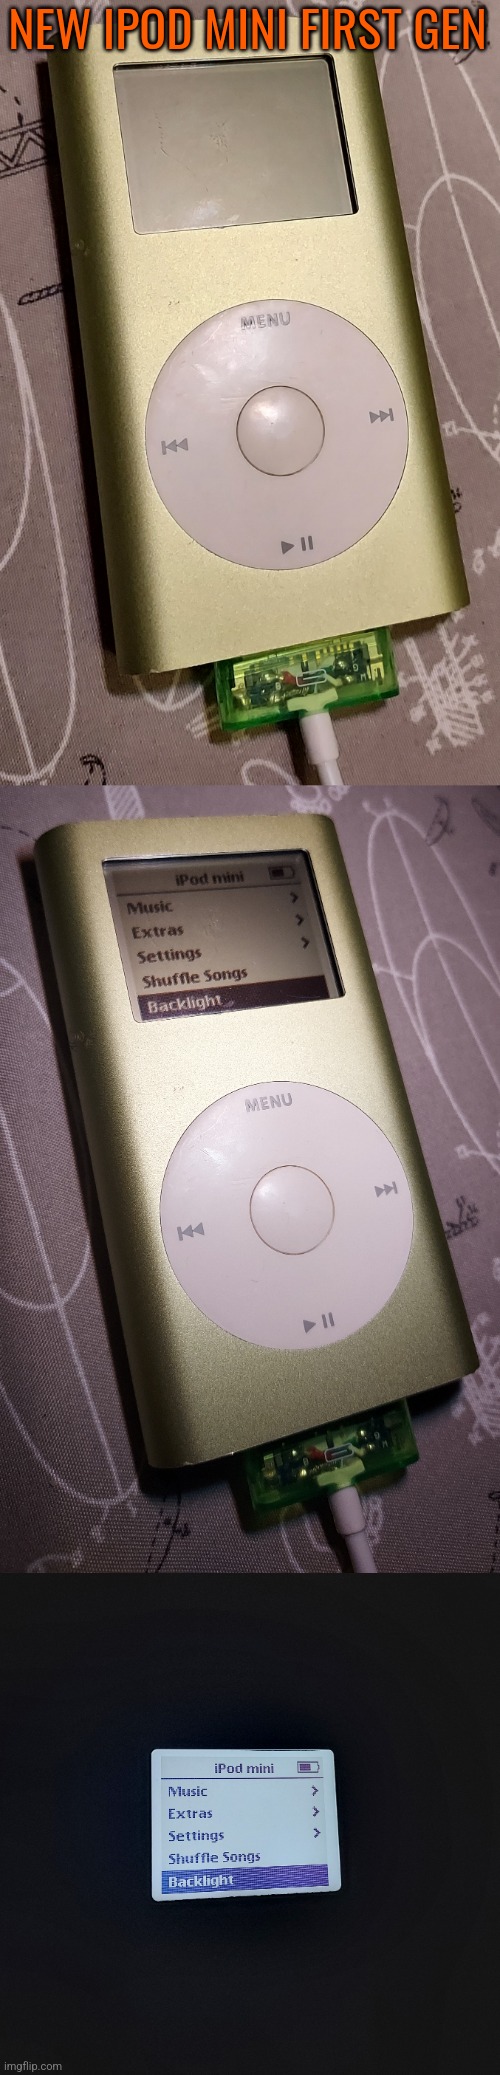 Shrek green, of course | NEW IPOD MINI FIRST GEN | image tagged in ipod,ipodmini,mp3s | made w/ Imgflip meme maker